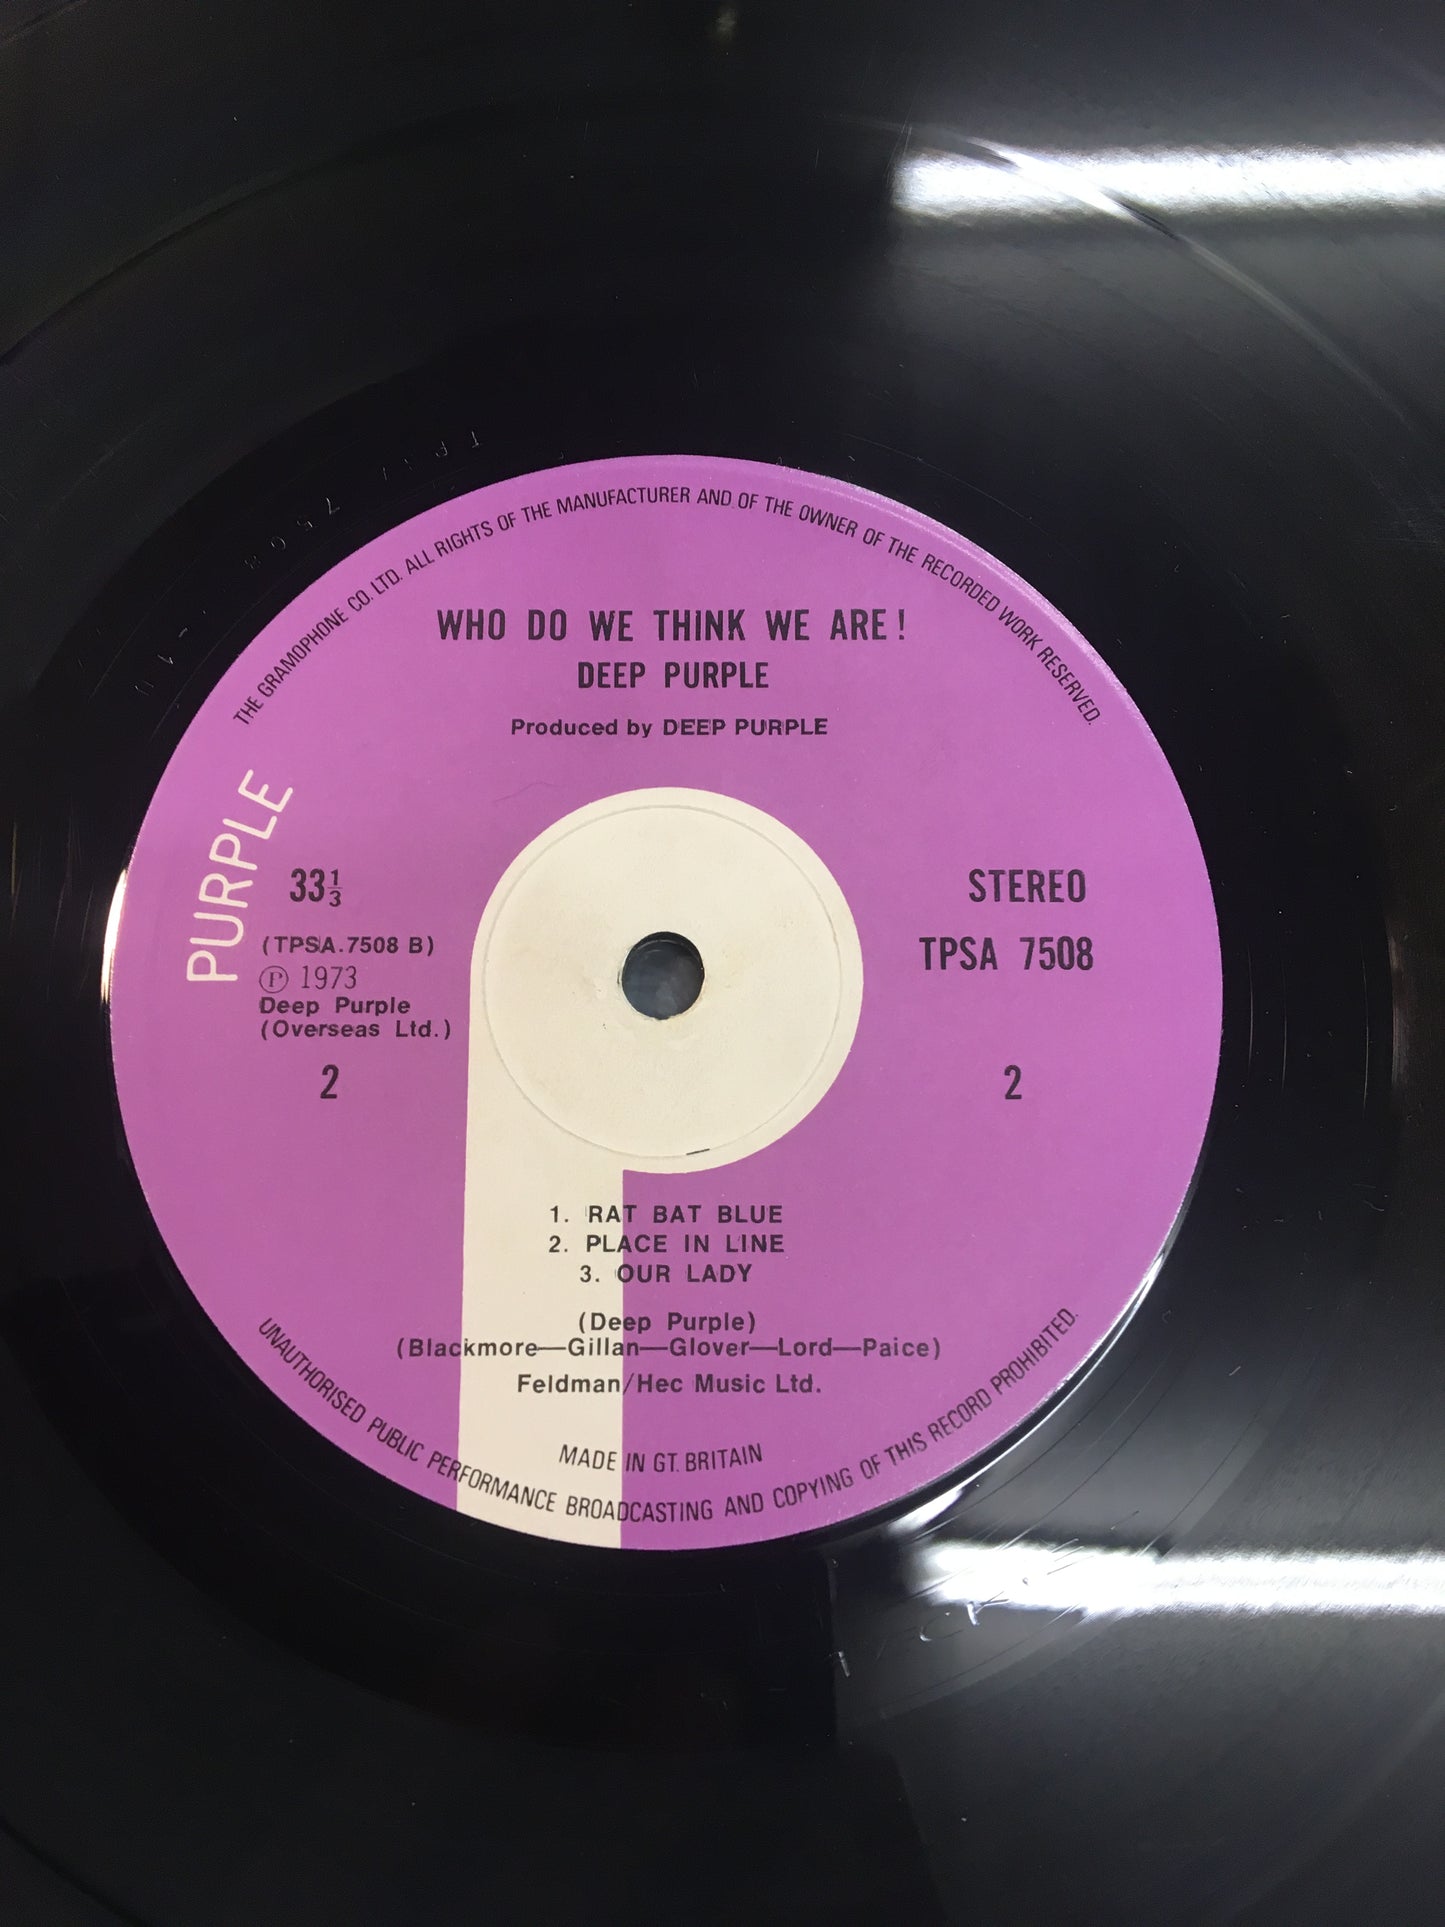 DEEP PURPLE LP ; WHO DO WE THINK WE ARE